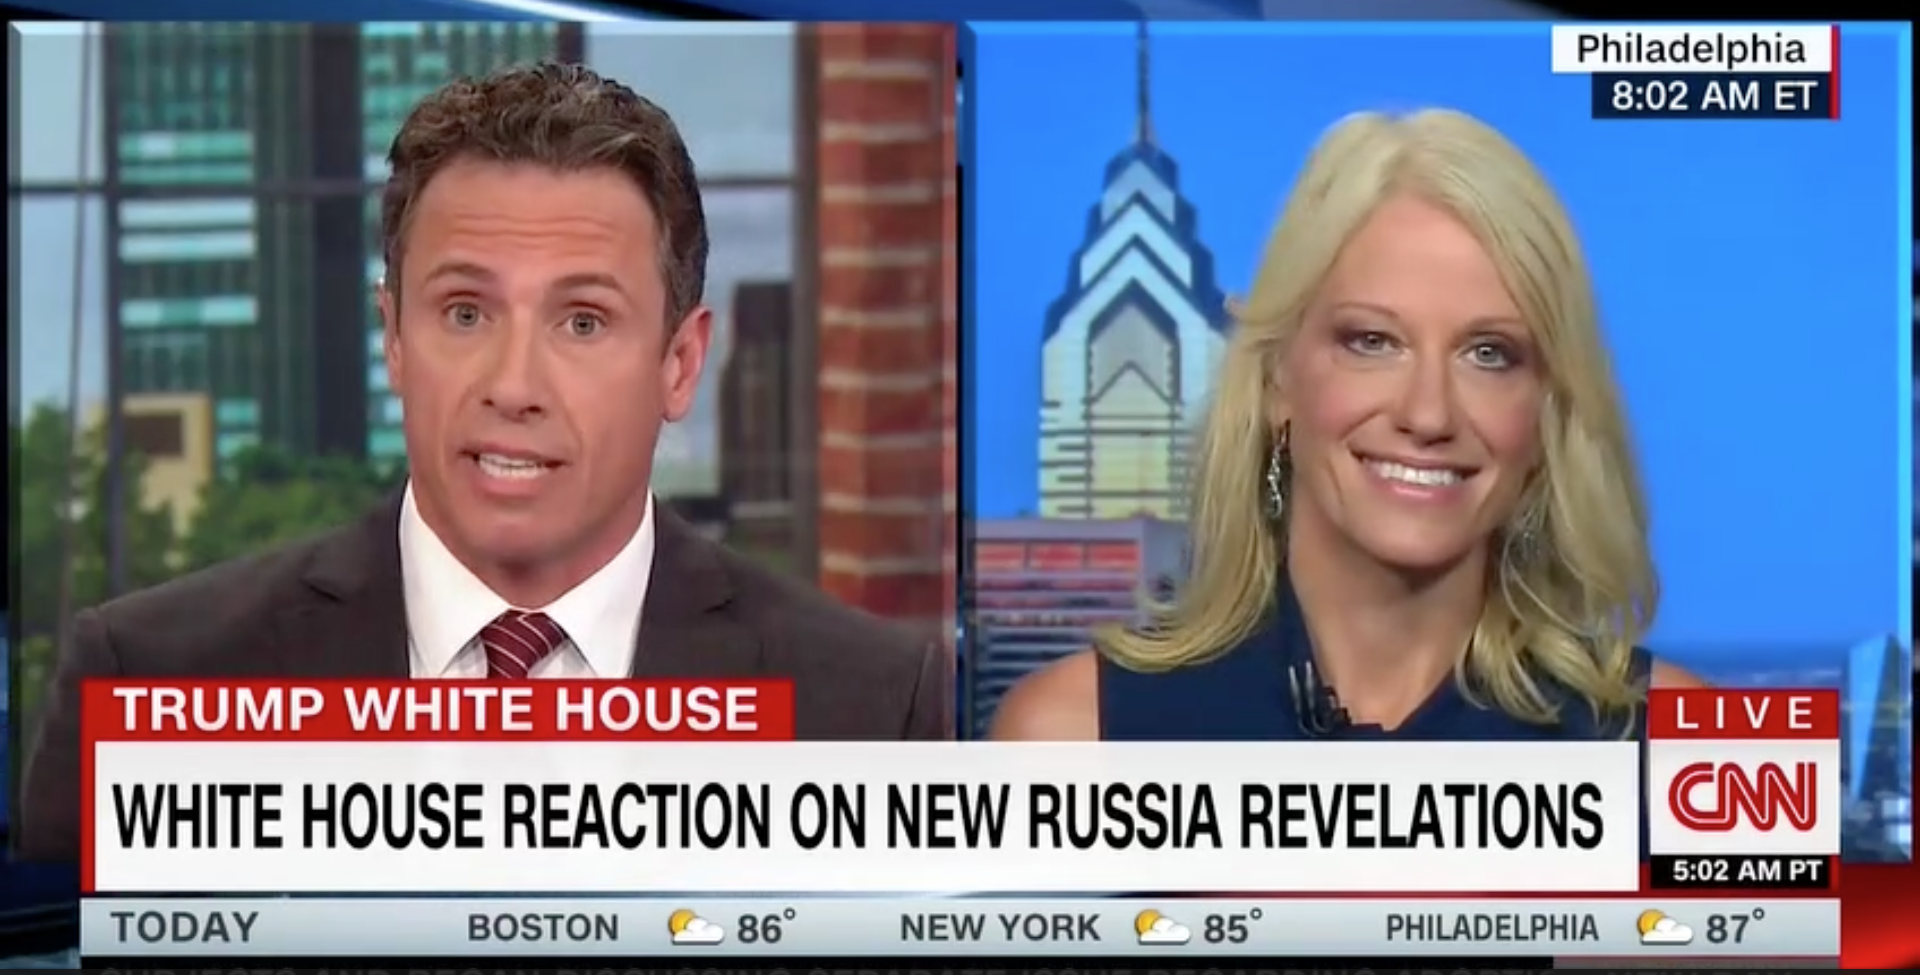 Chris Cuomo and Kellyanne Conway.